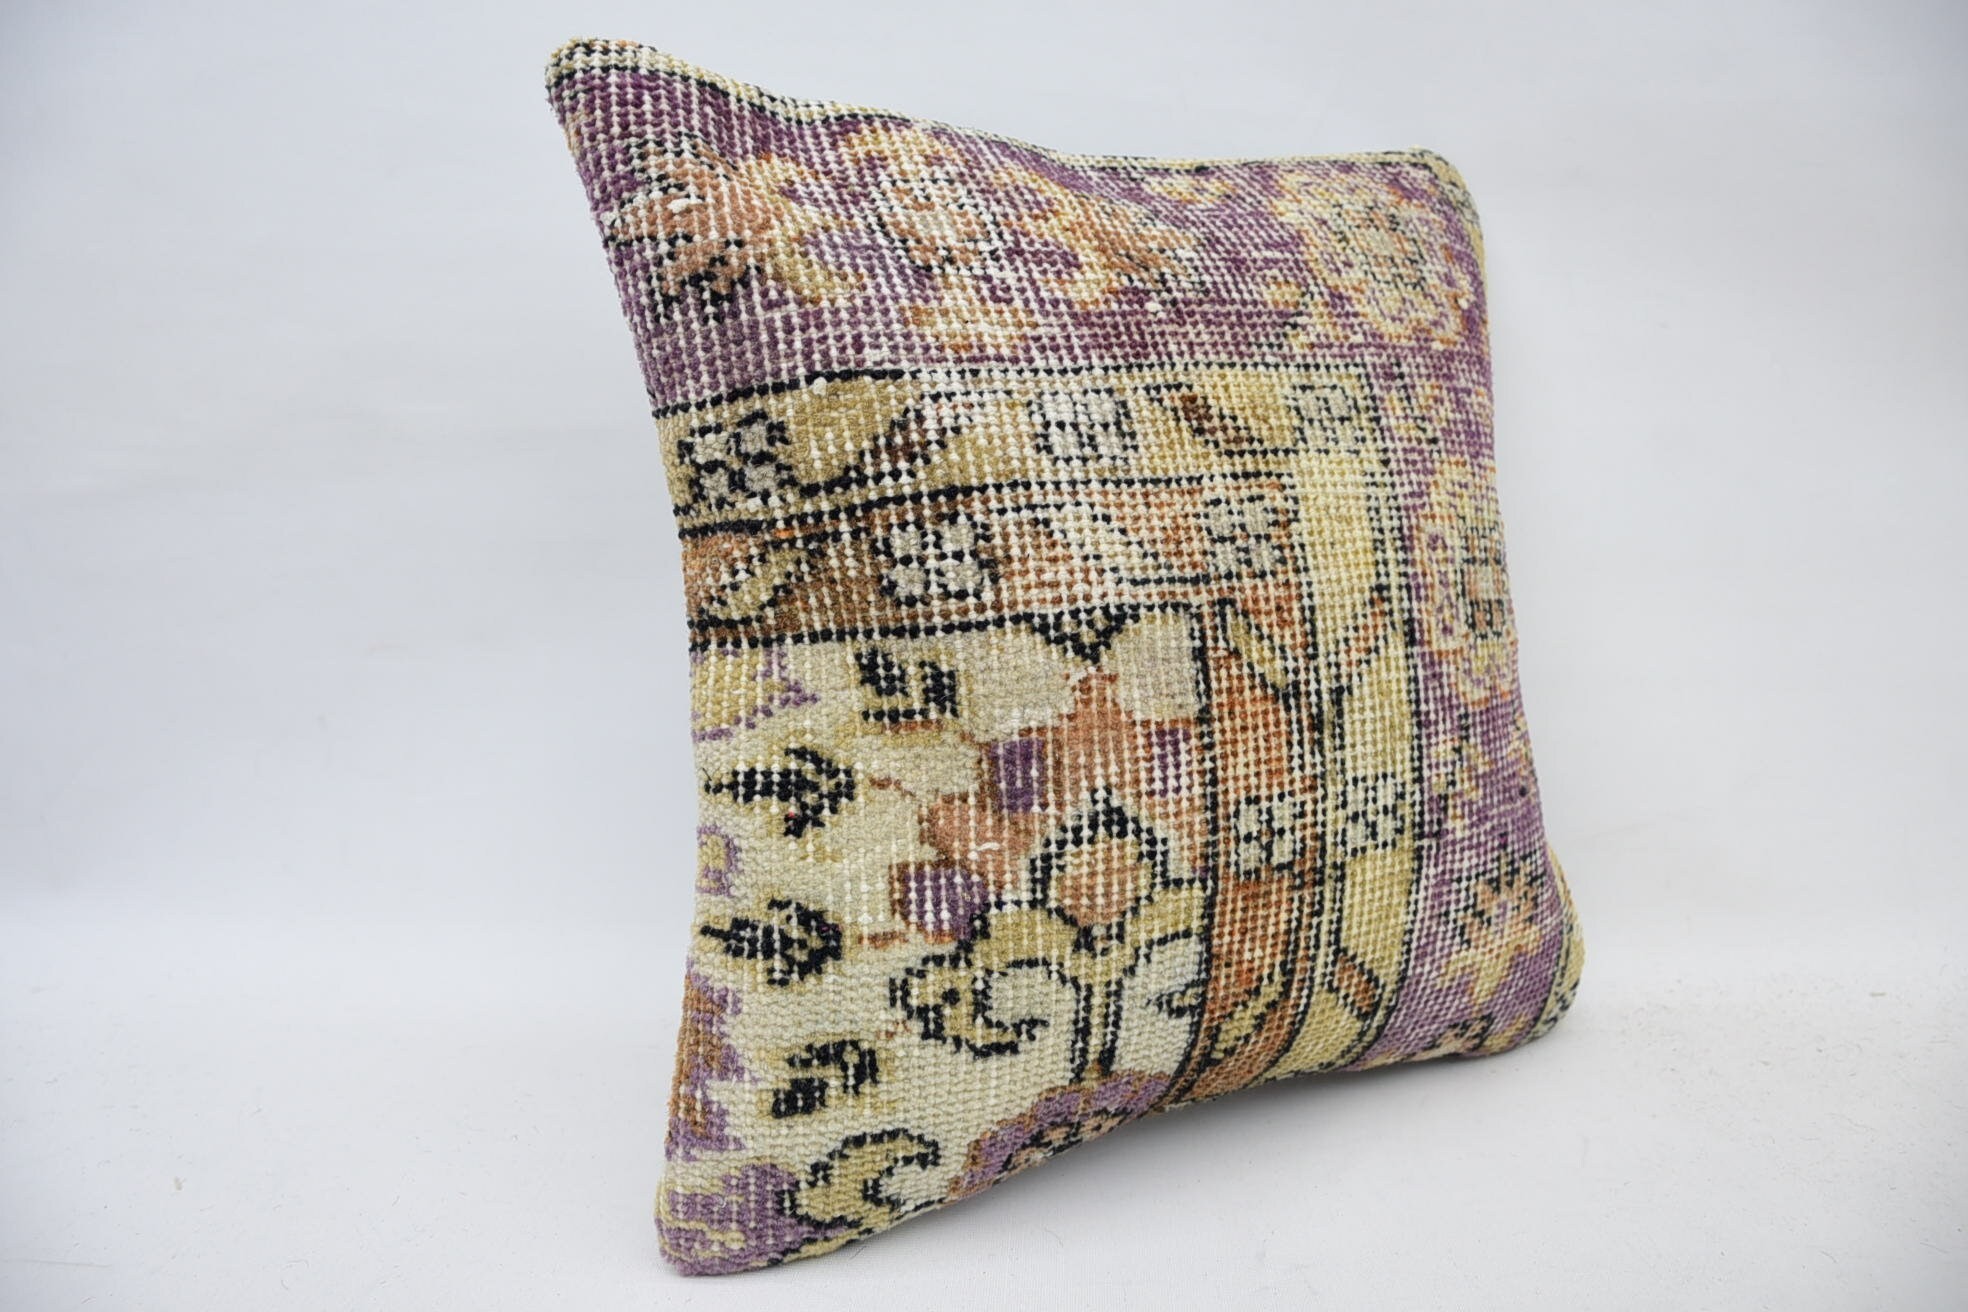 Throw Kilim Pillow, 14"x14" Beige Pillow Case, Gift Pillow, Turkish Rugs Cushion Cover, Kilim Pillow Cover, Colorful Pillow Cover